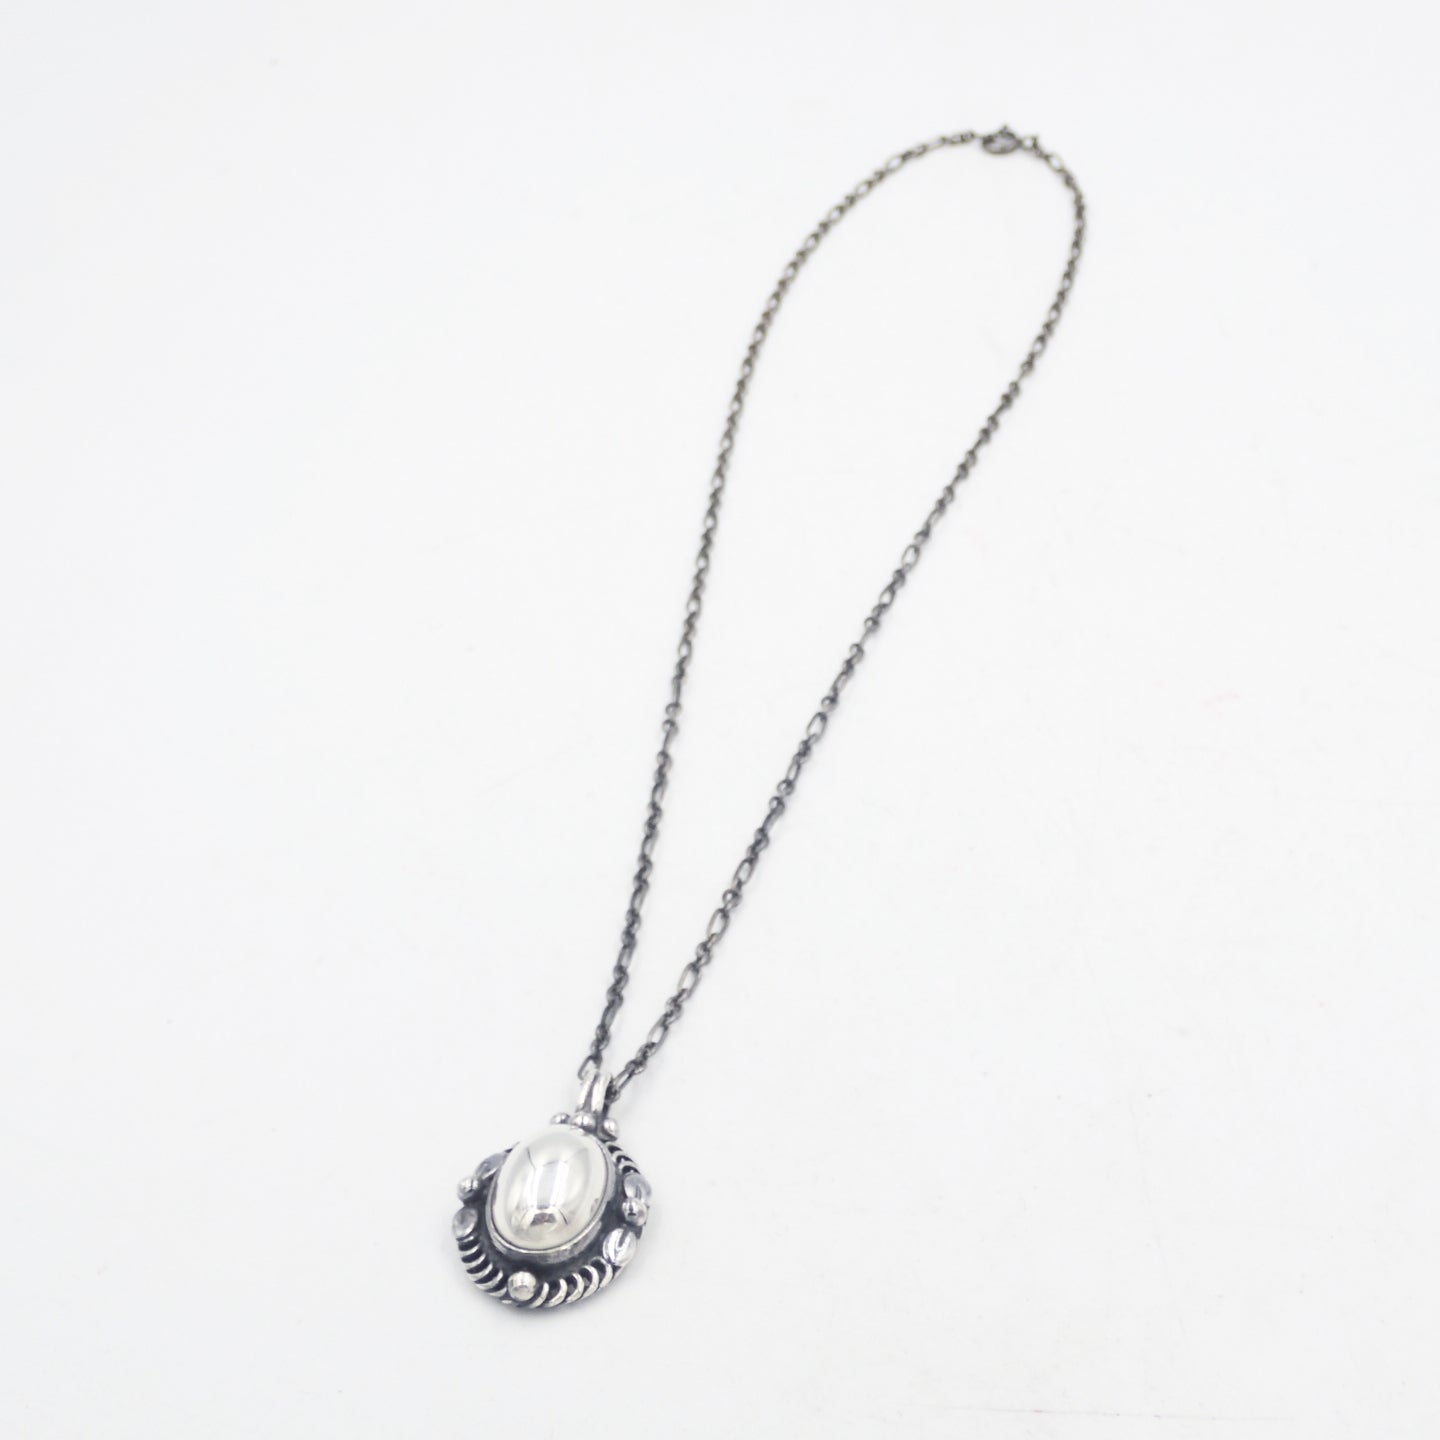 Good condition ◆ Georg Jensen 1995 ear pendant necklace SV925 Silver with box GEORG JENSEN [AFI15] 